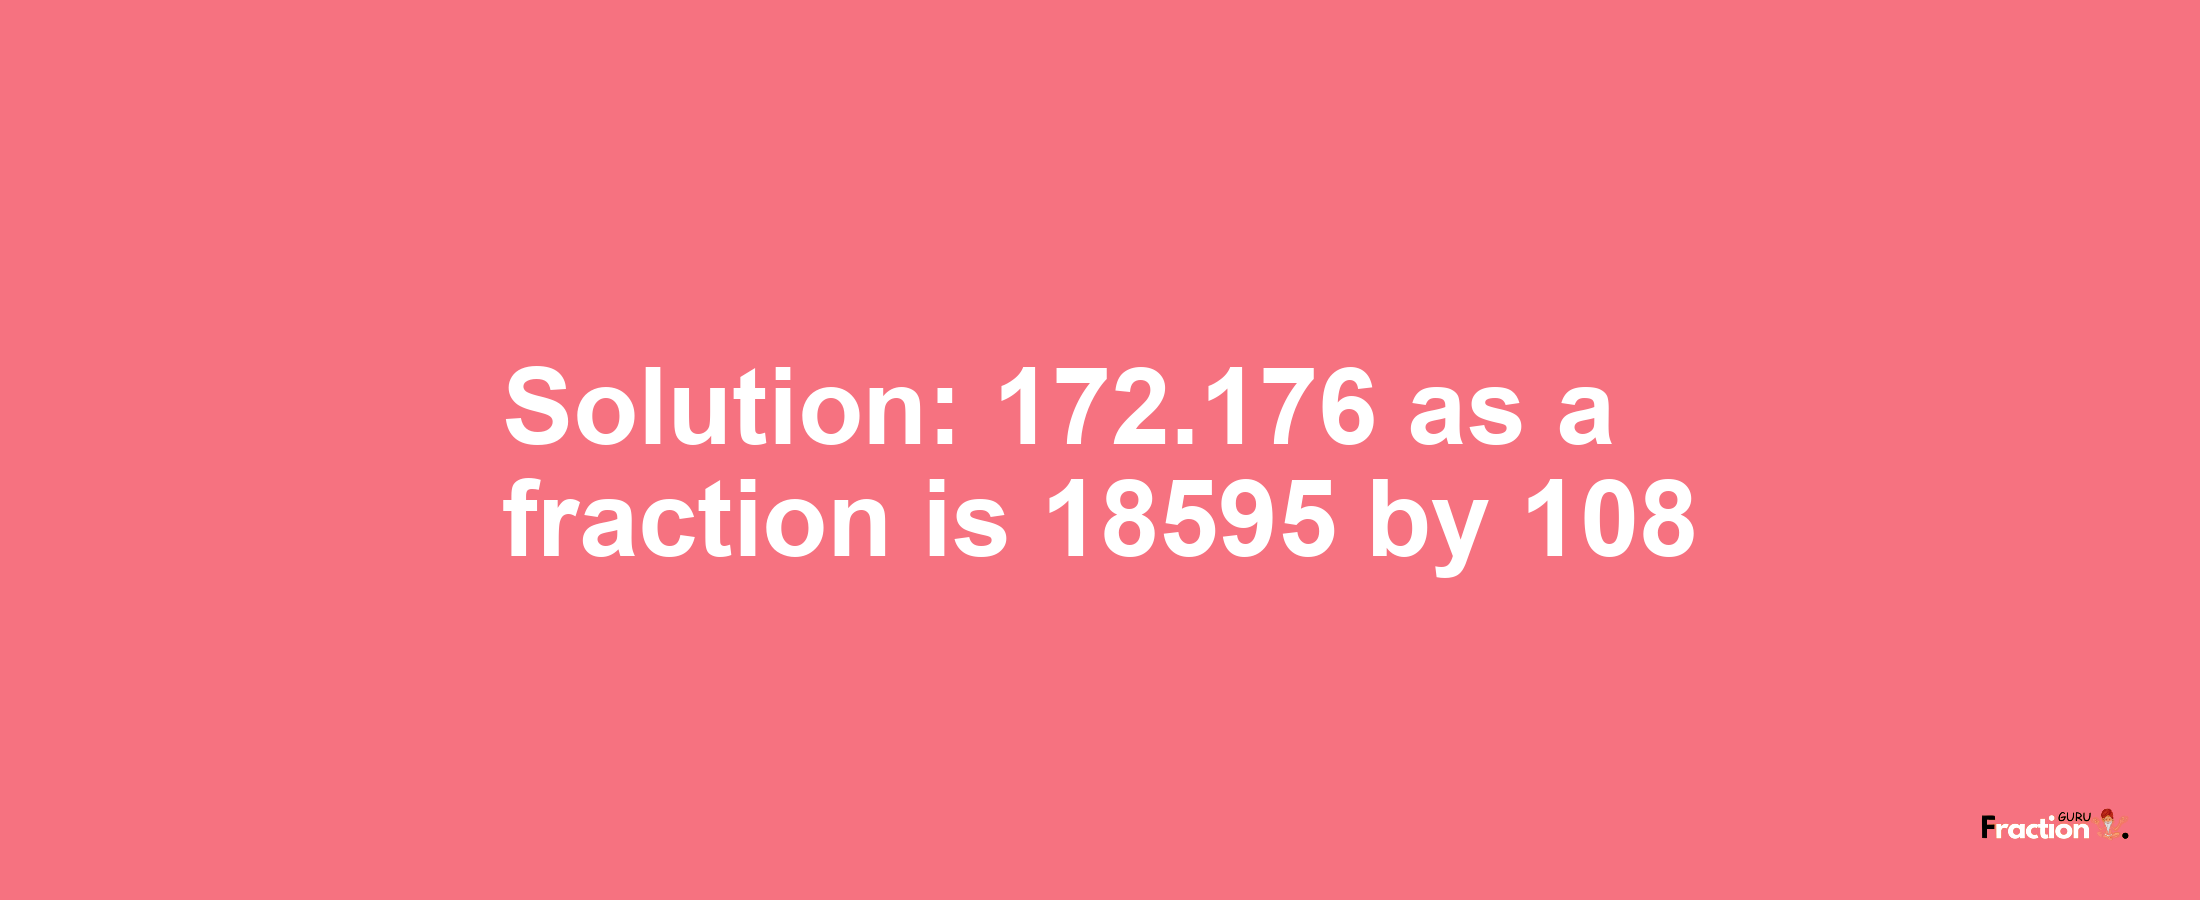 Solution:172.176 as a fraction is 18595/108